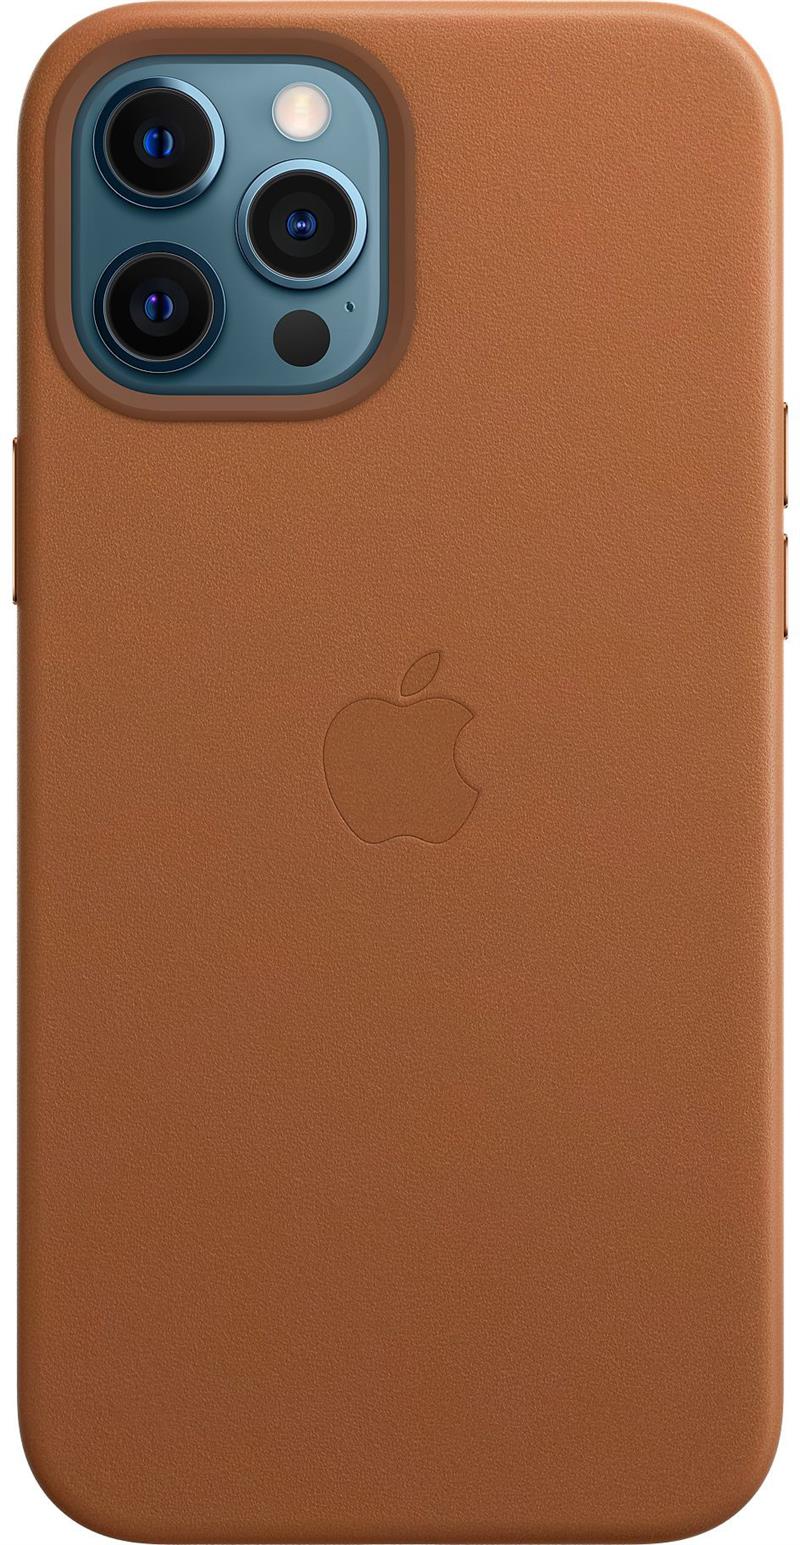 Apple iPhone 12 Pro Max Leather Case with Magsafe Saddle Brown 